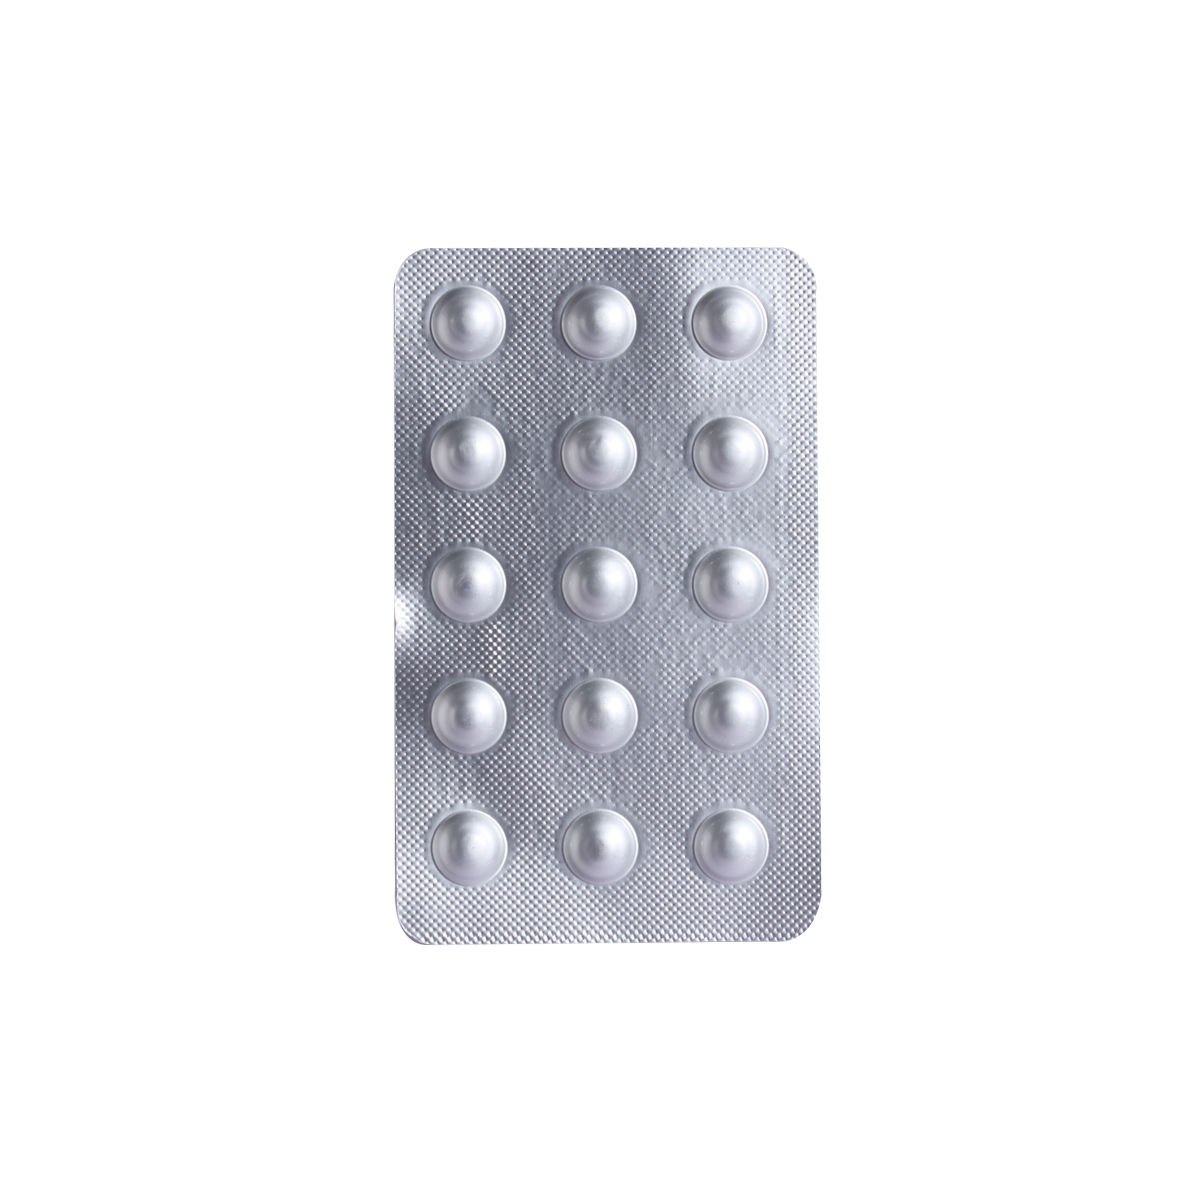 Atorica-10 Tablet 15's, Pack of 15 TABLETS